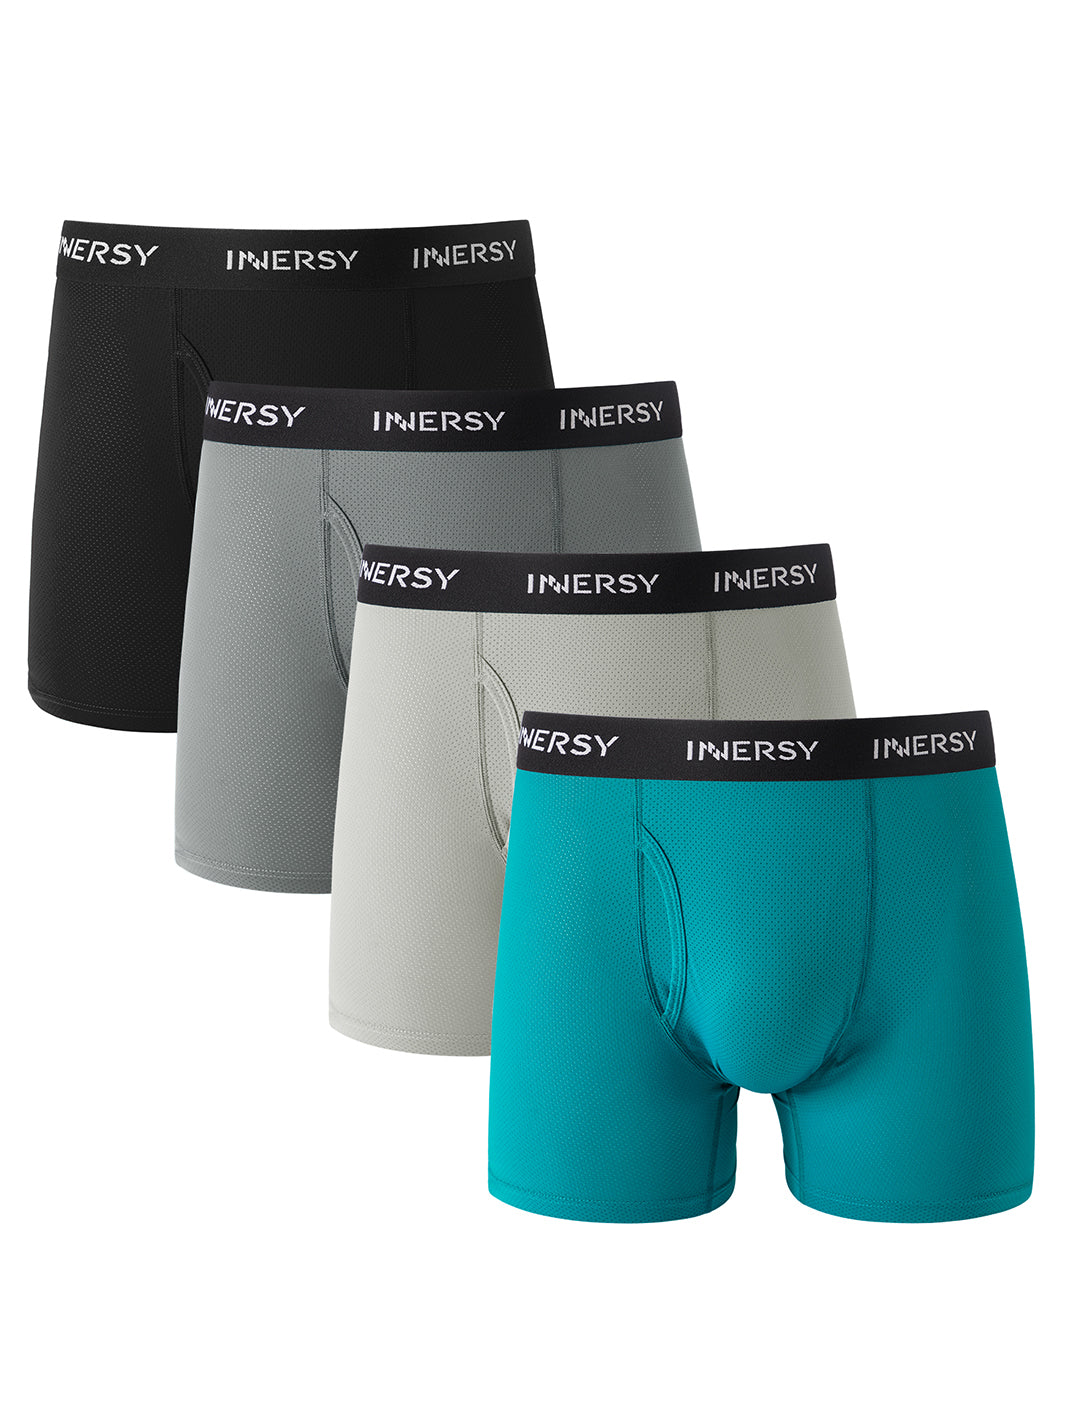 Other, Jockey Undergarments Sell At 10% Discounted Price For Mens Only